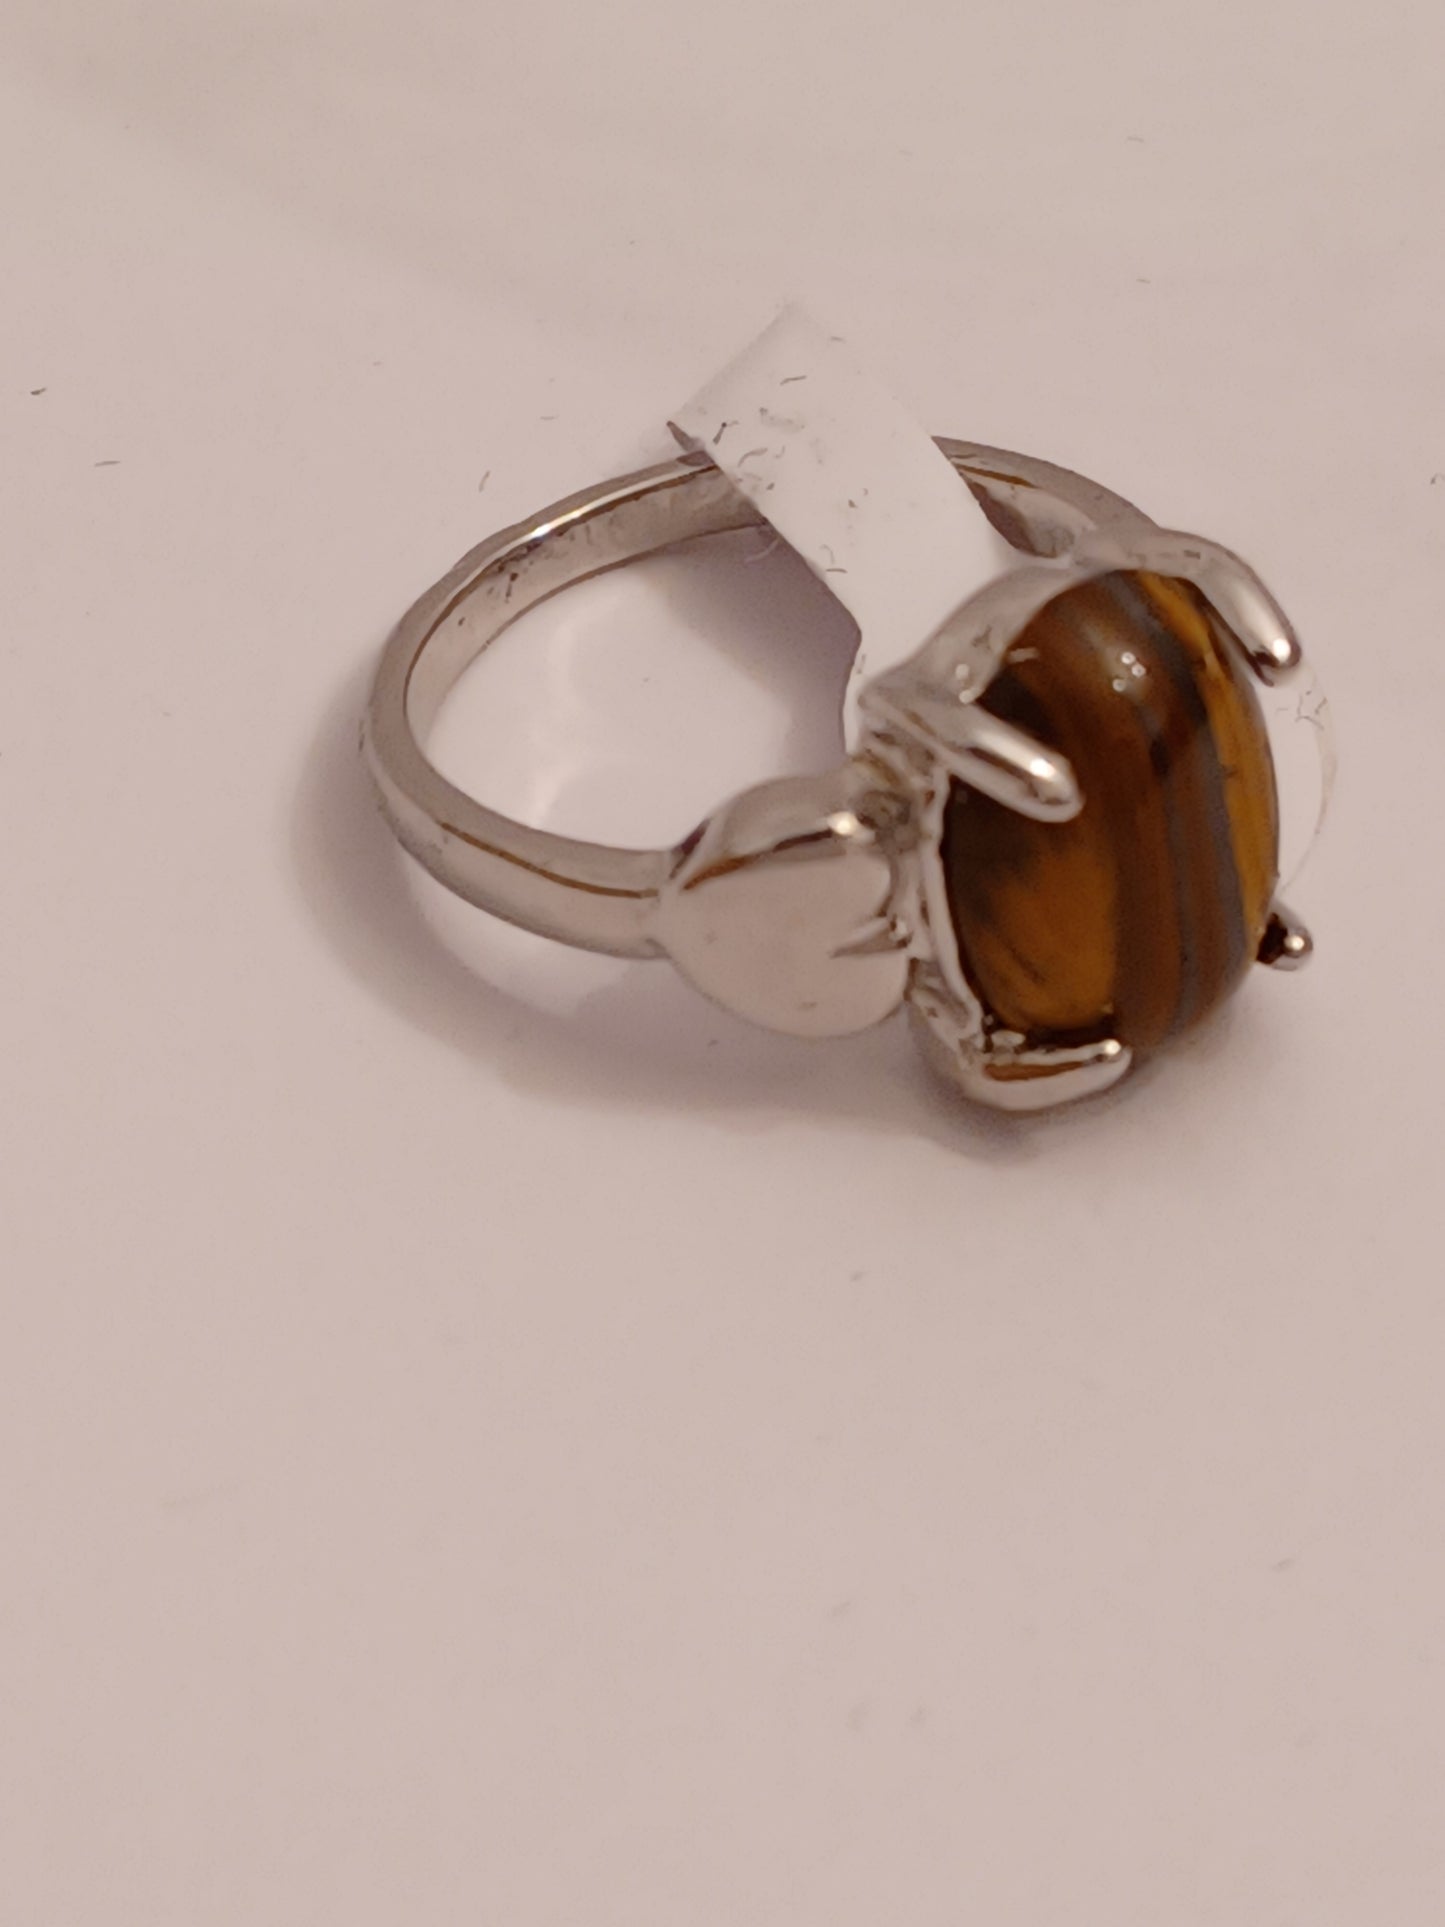 Tiger's Eye Ring with Heart - Size 9